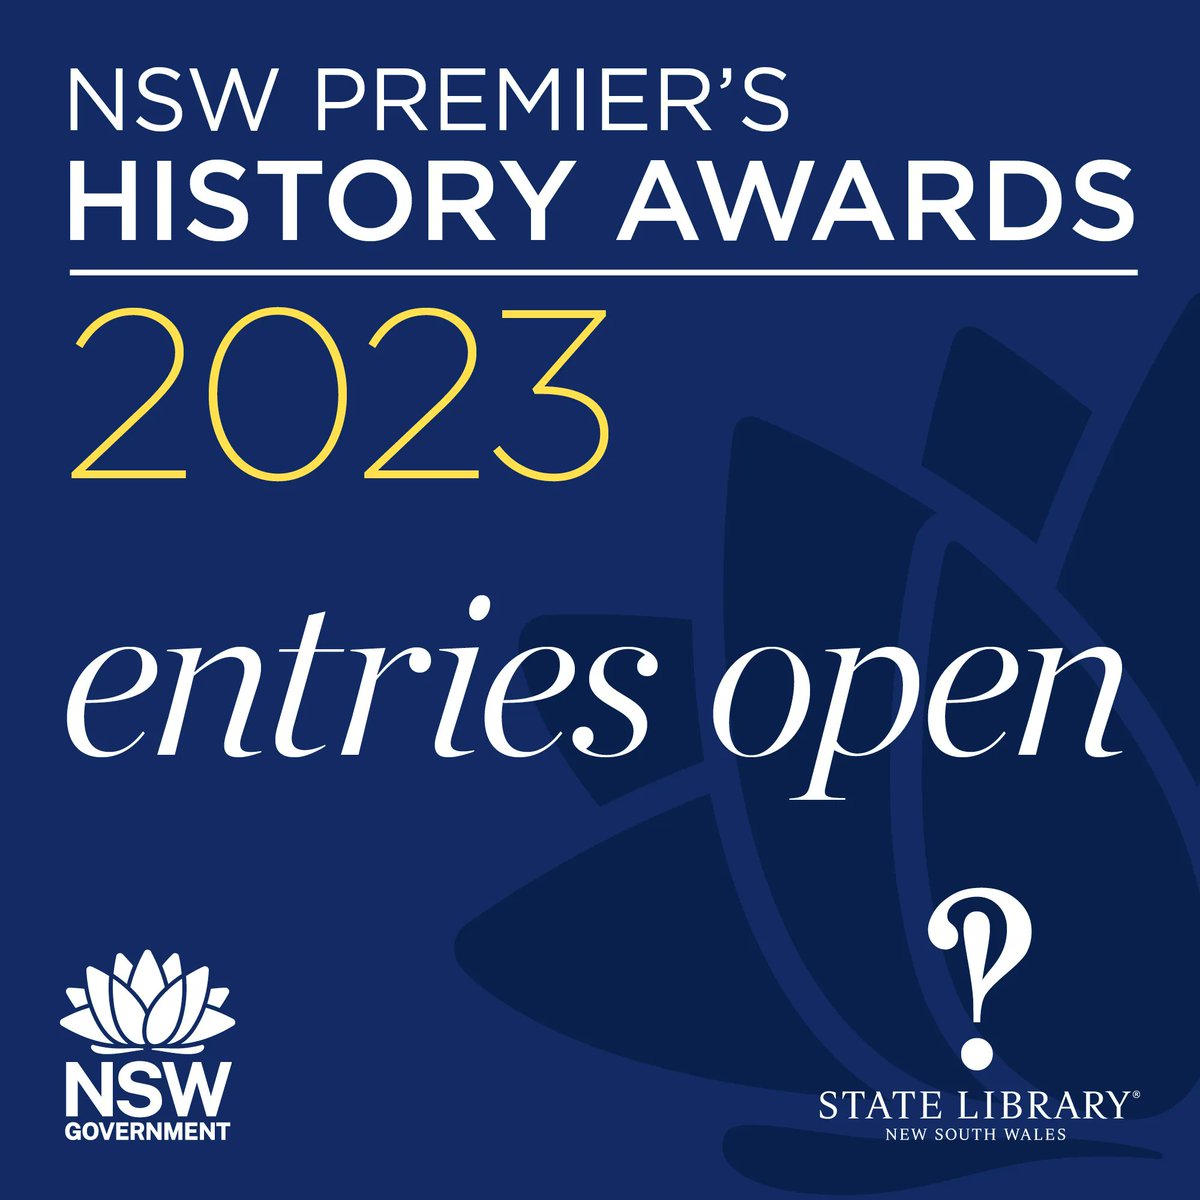 Entries for the 2023 NSW Premier's History Awards are now open! Administered by the @statelibrarynsw in association with @Create_NSW, the NSW Premier’s History Awards will offer prizes in six categories this year. Entries close 5pm, 6 April 2023 via buff.ly/41amNwV